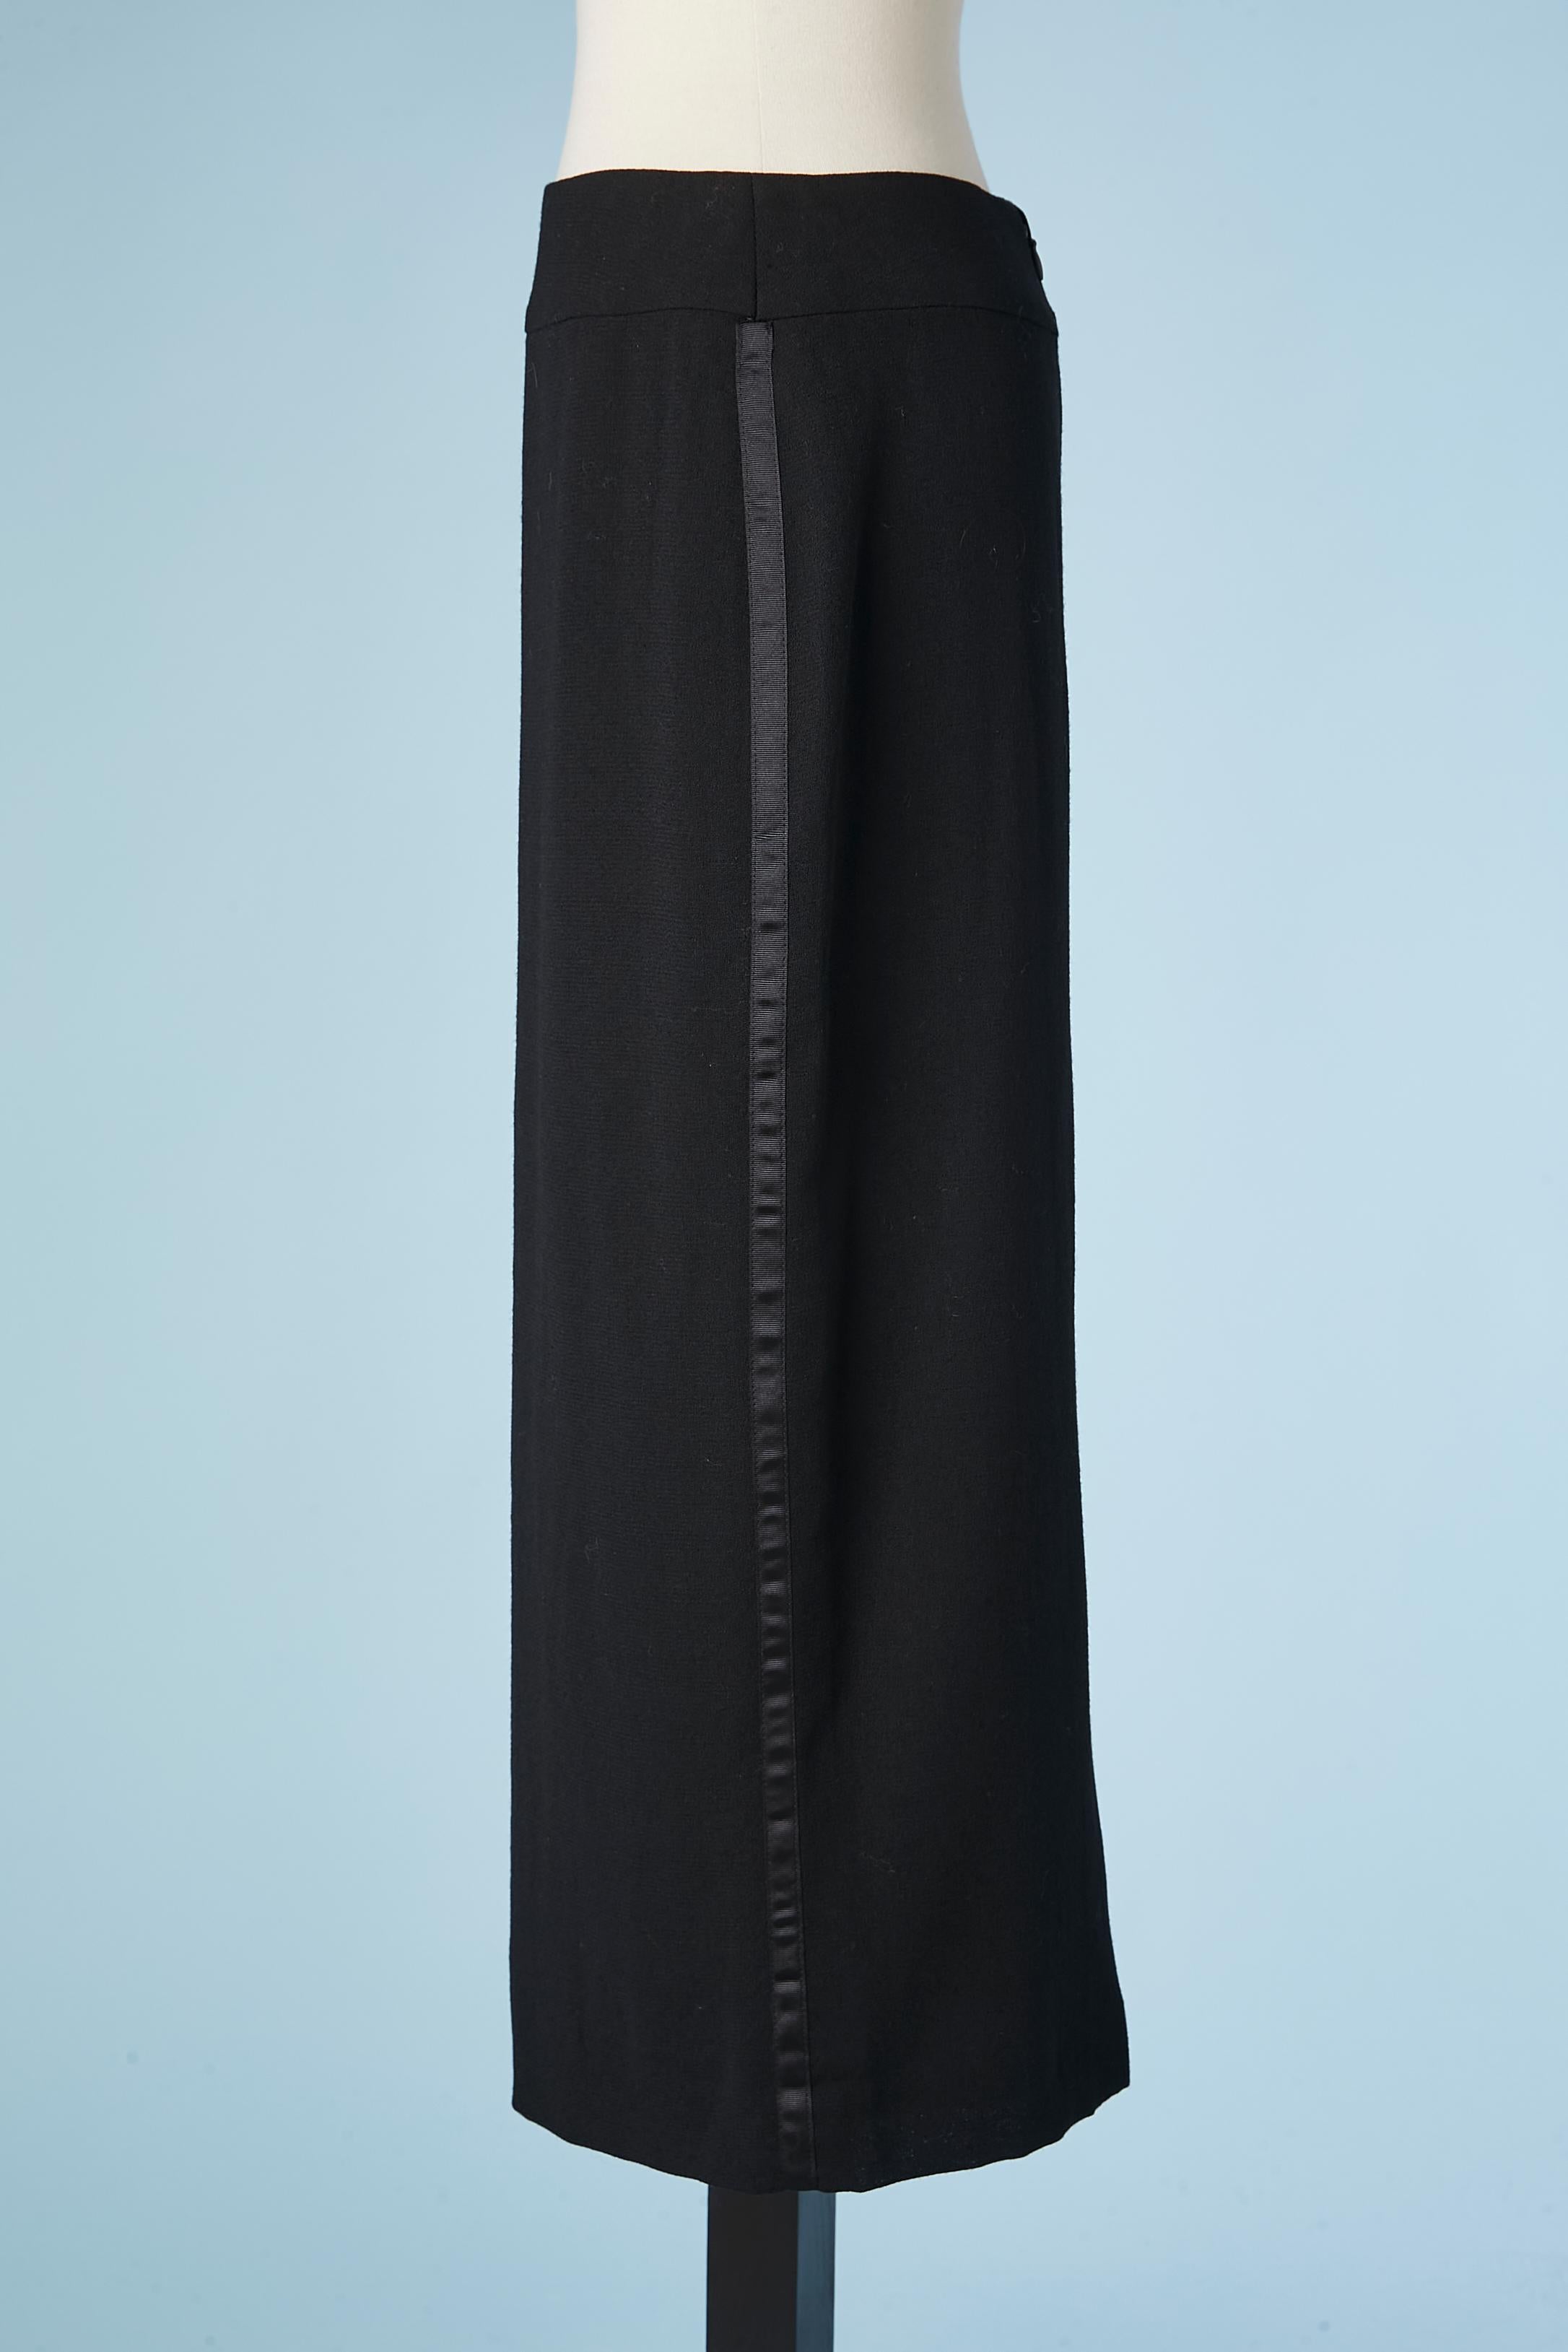 Black Long tuxedo black wool pencil skirt with silk branded lining Chanel  For Sale